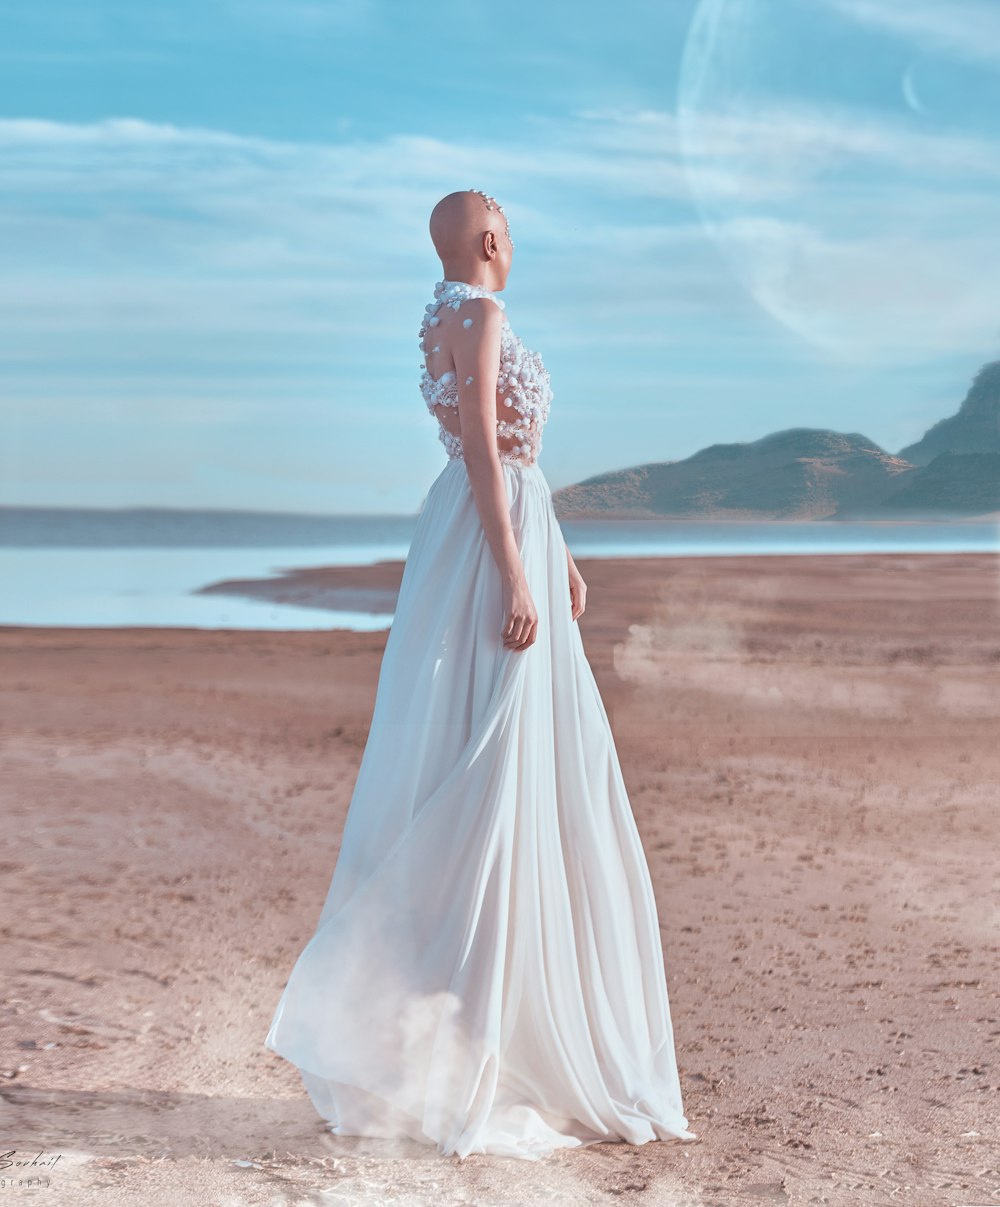 woman in white wedding dress standing on brown sand during daytime